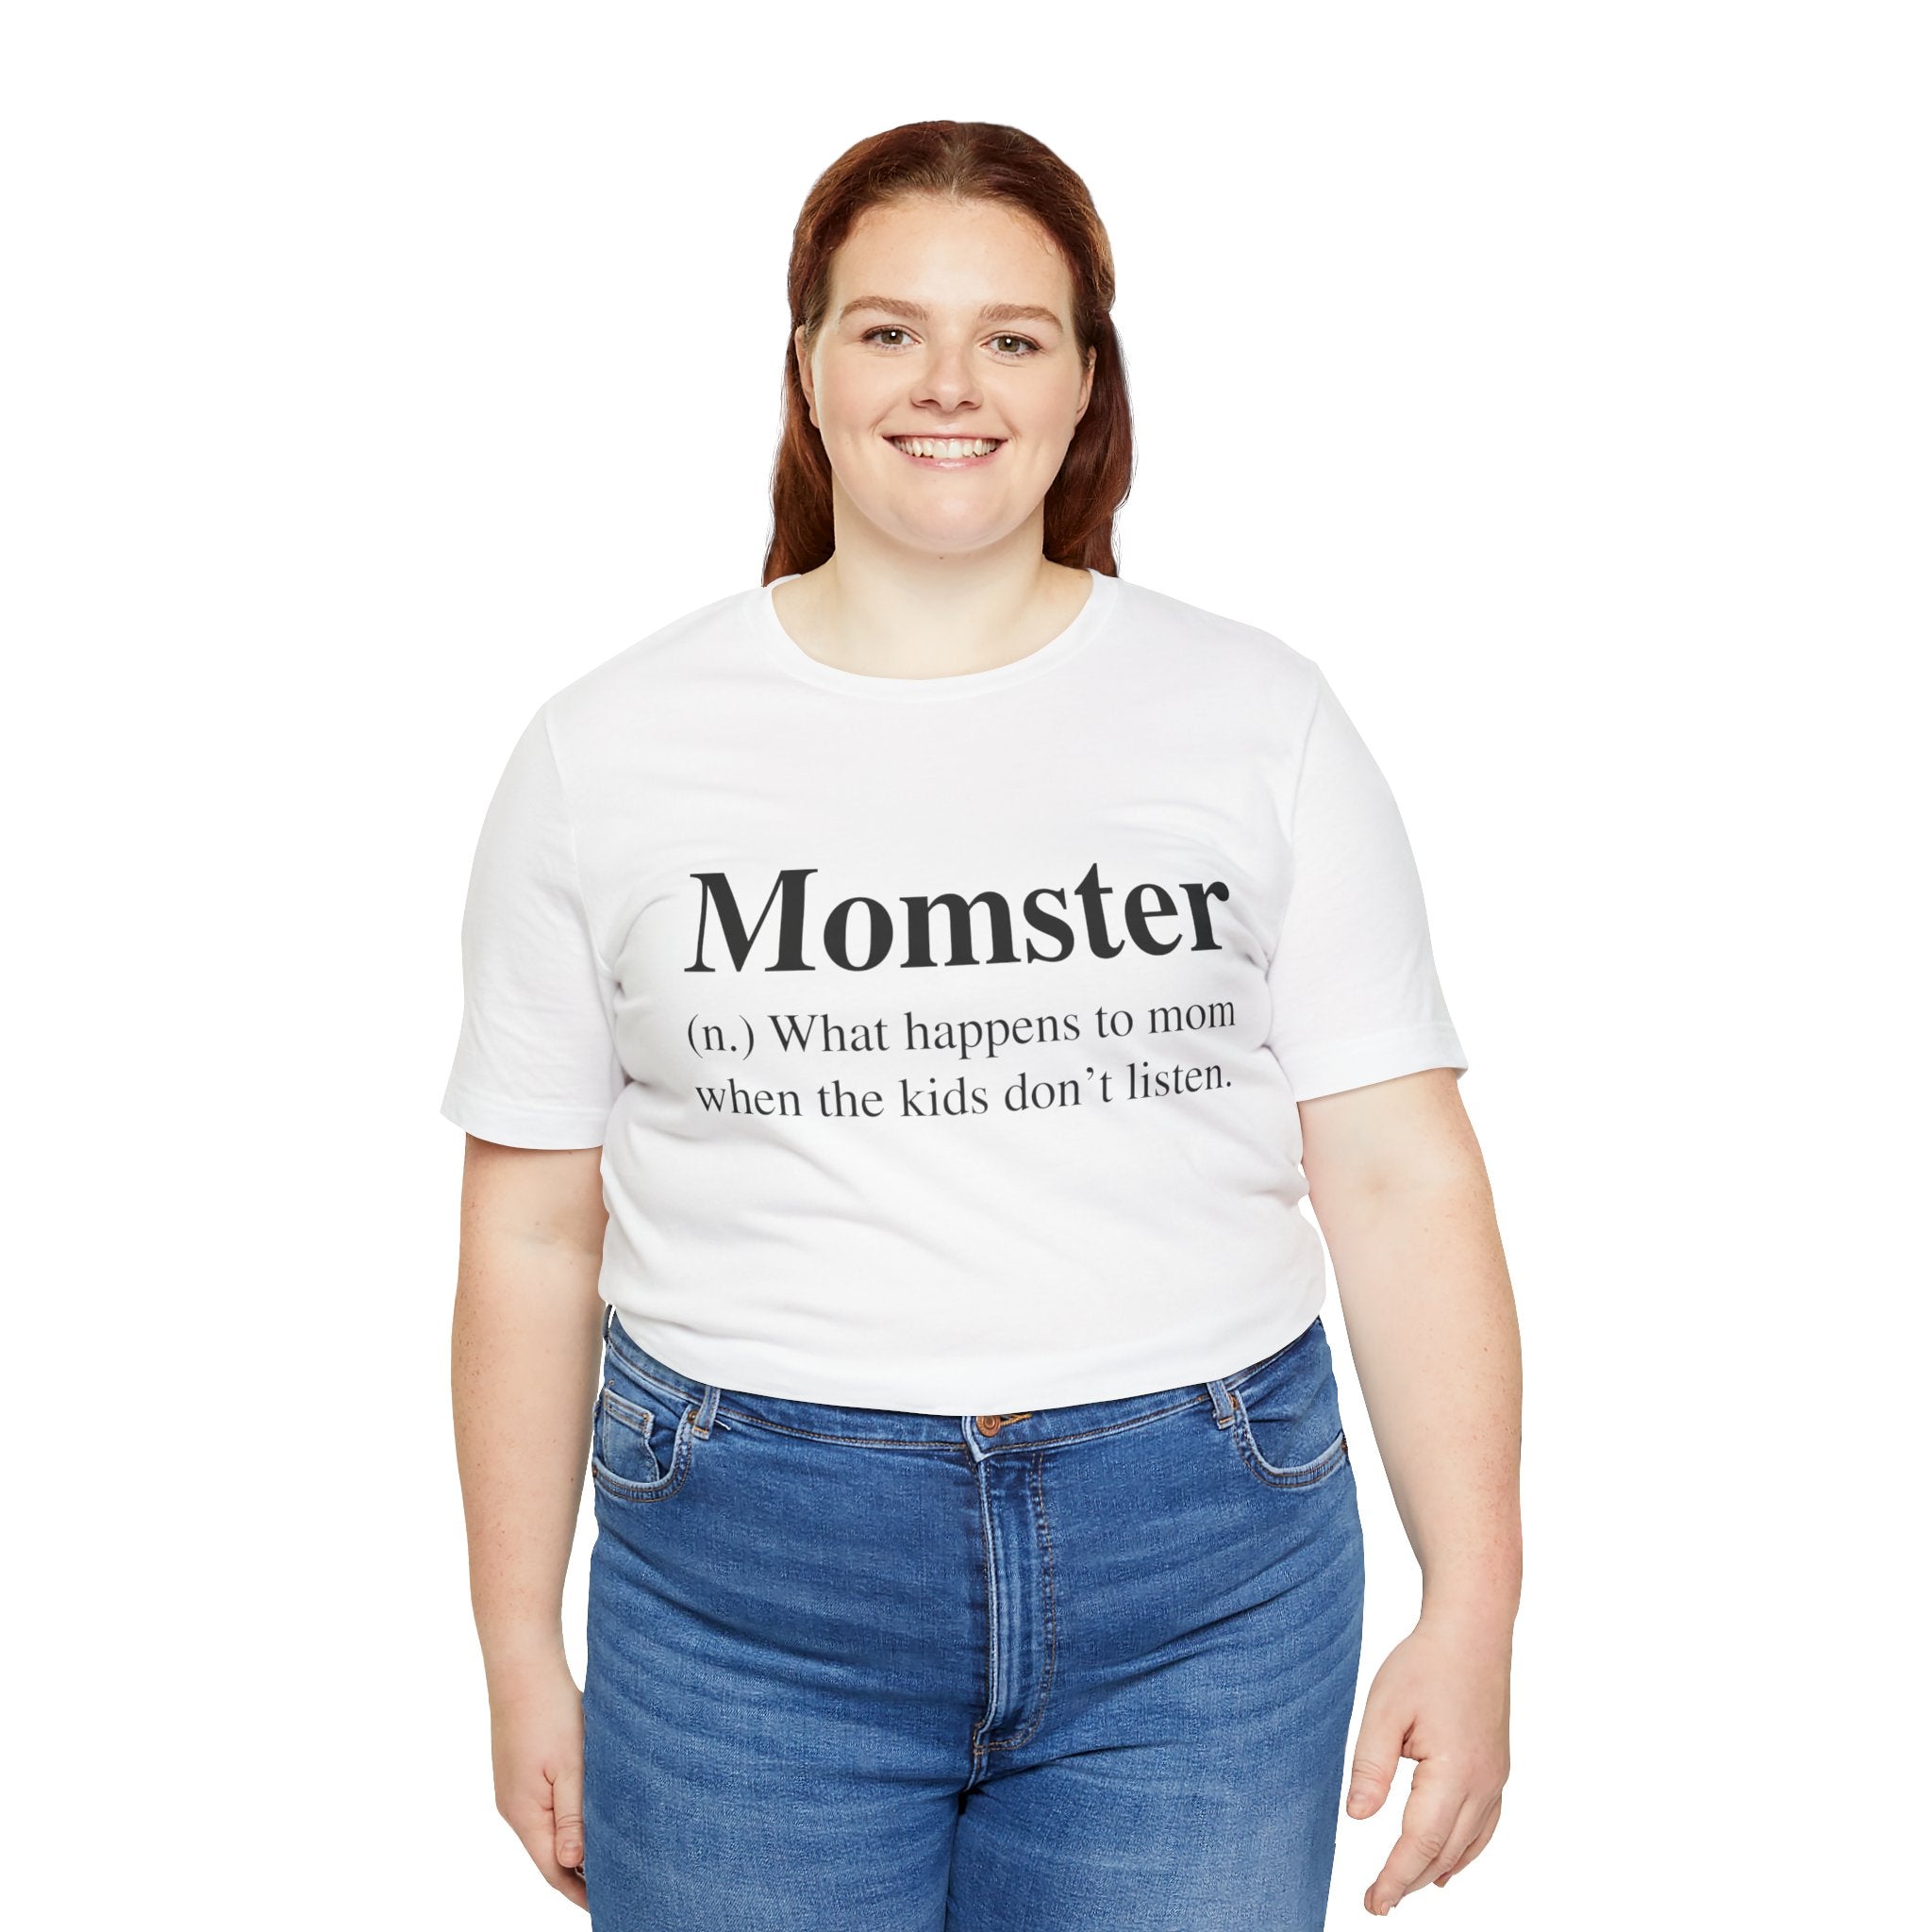 A woman smiling in a Momster T-Shirt, paired with blue jeans.